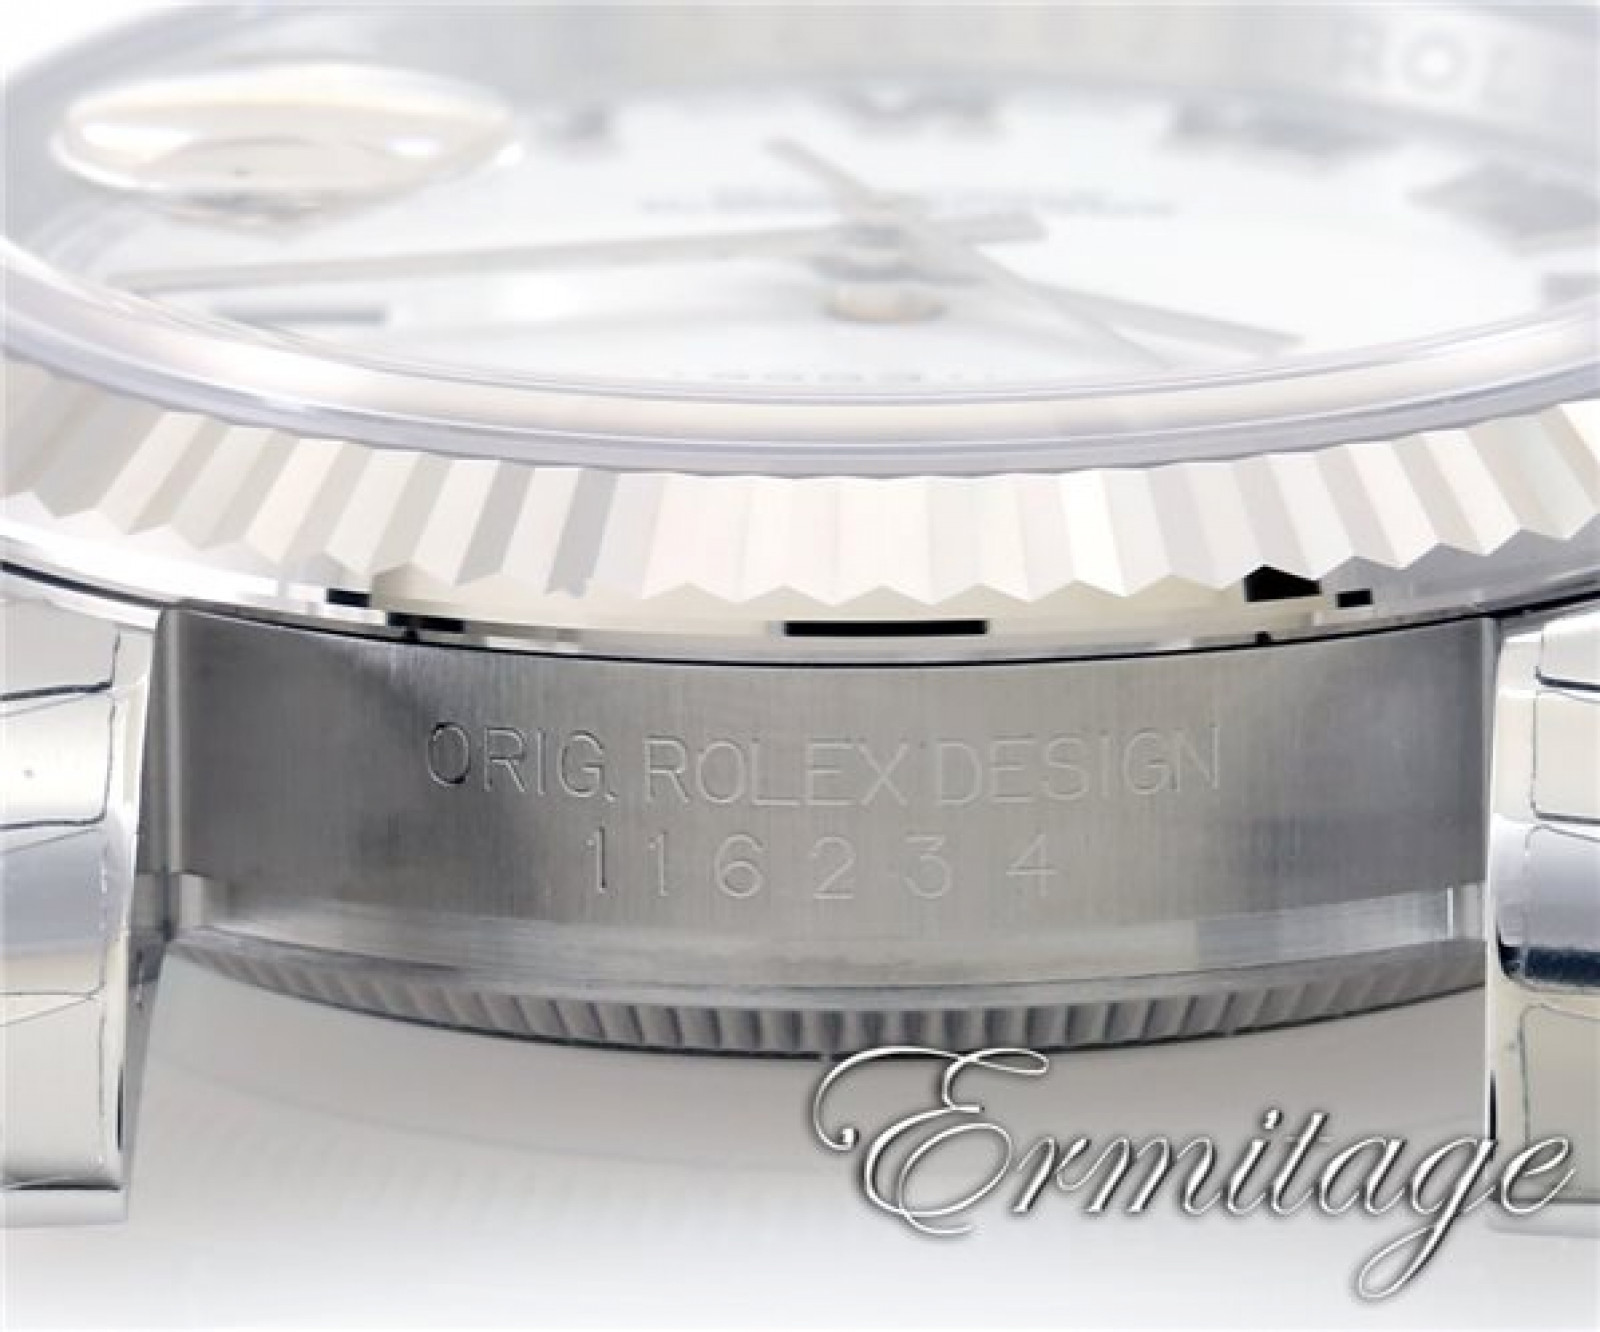 Rolex Datejust 16234 Steel with White Dial